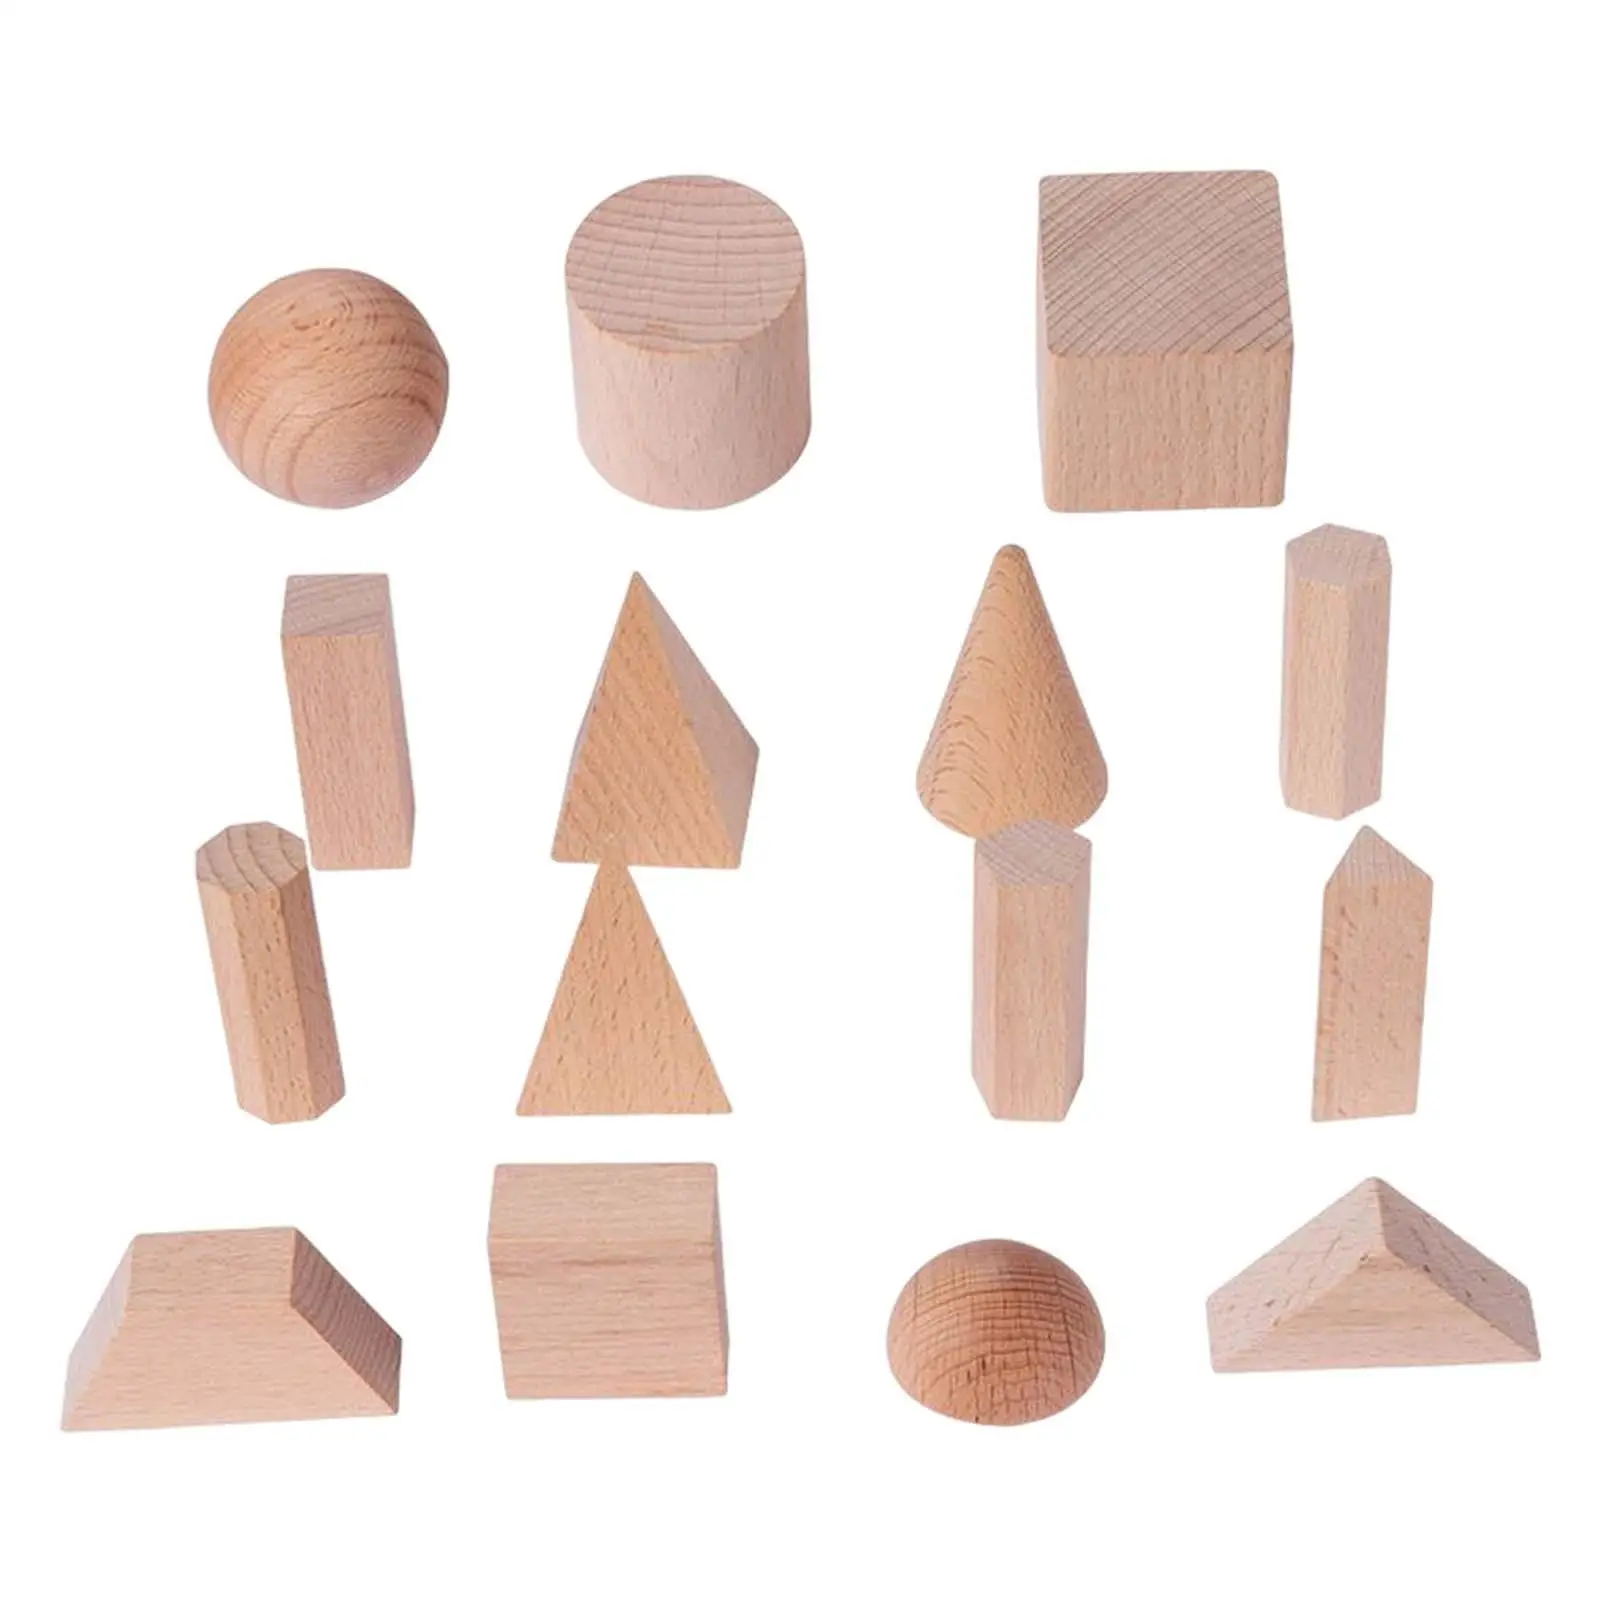 15Pcs Wood Geometric Solids,Learning Math Toys,Montessori 3D Shapes Stacking Toy